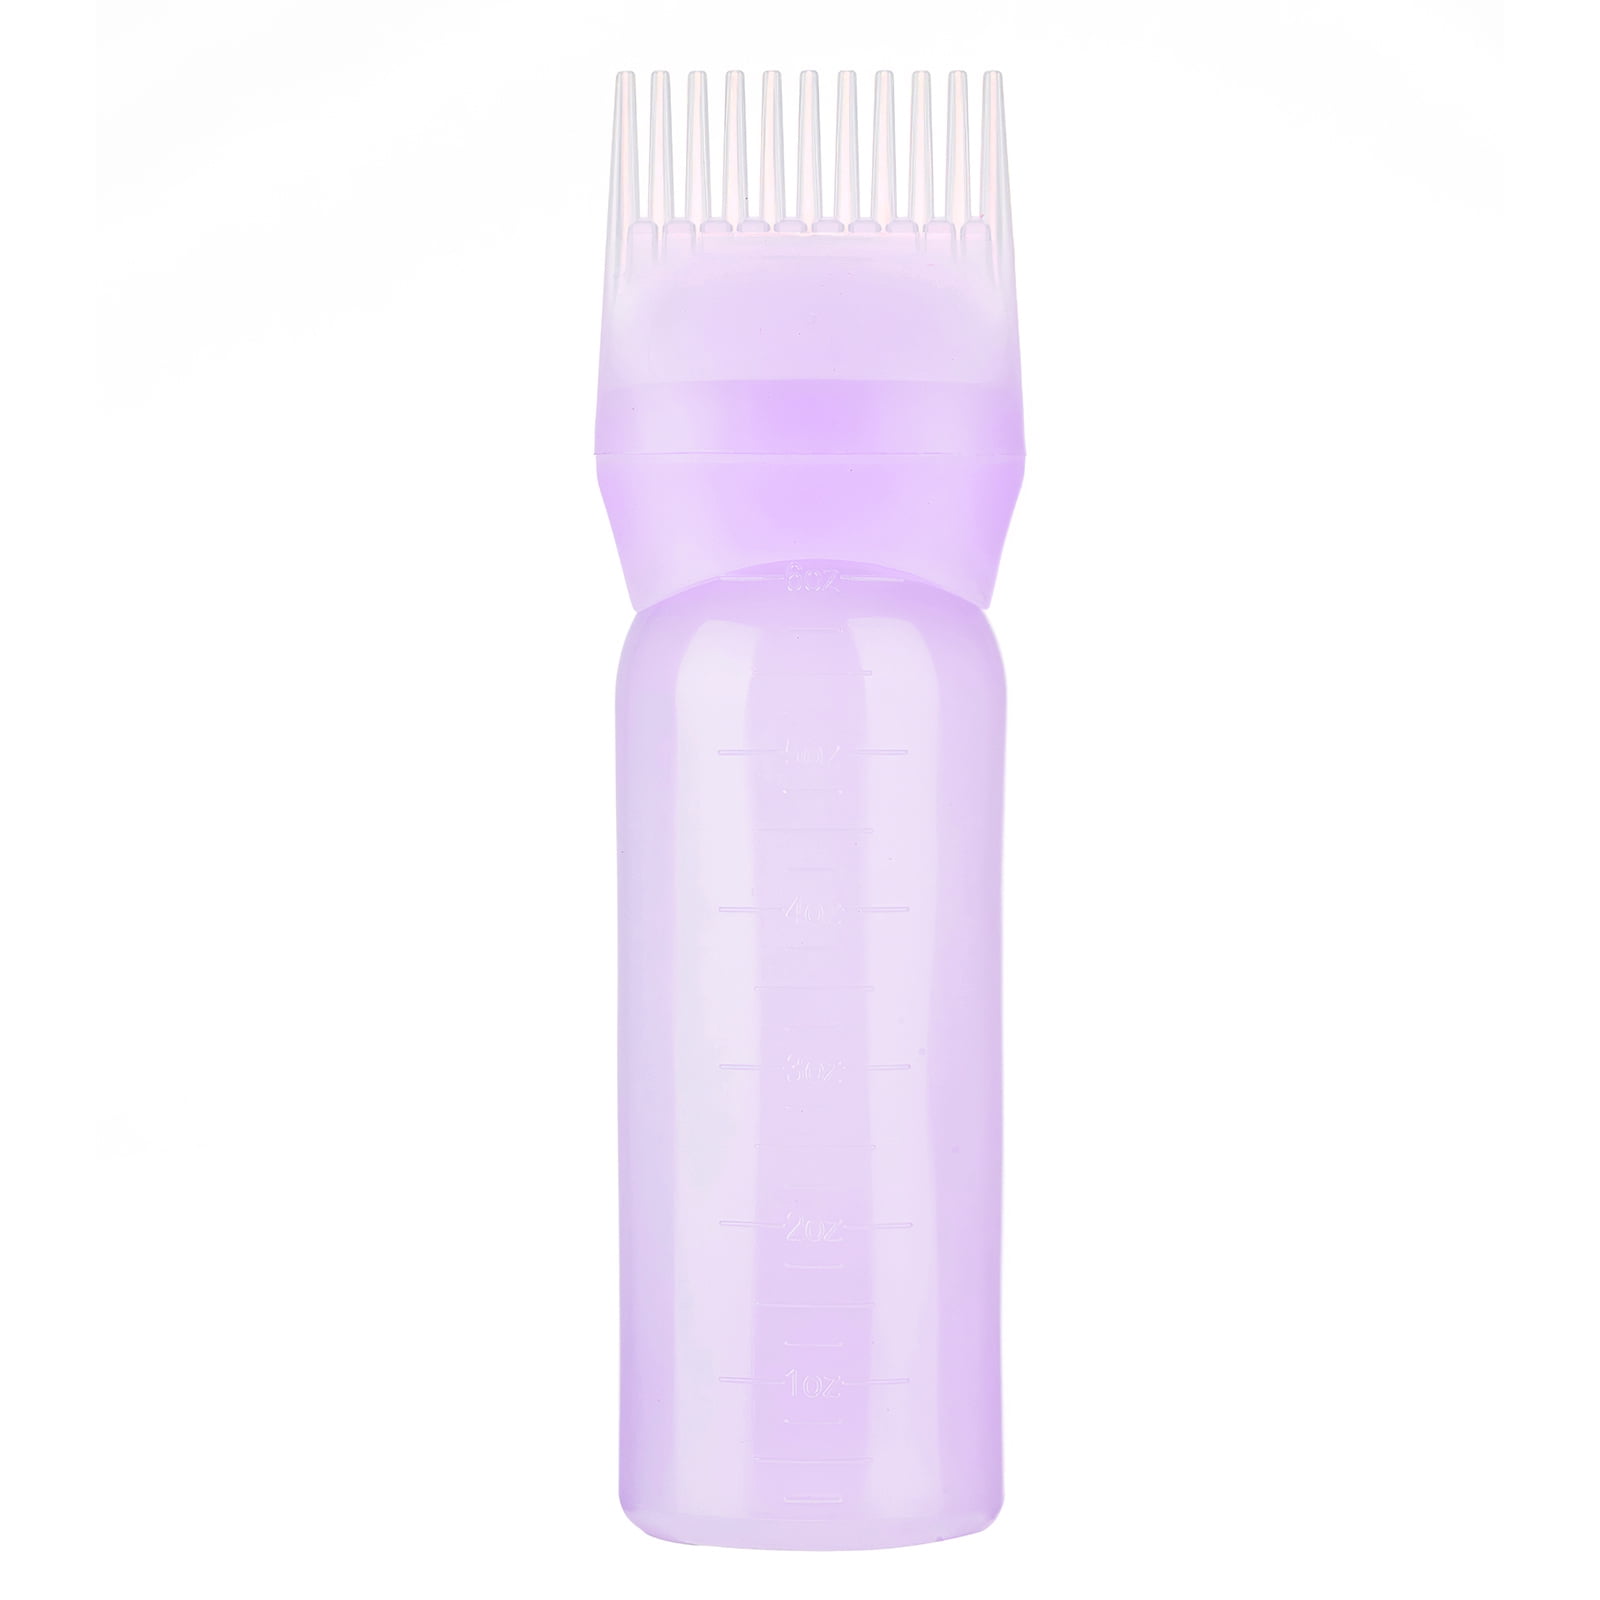 ADVEN Purple Hair Dye Bottle Plastic Refillable Root Comb Applicator Bottle  Hair Styling Tool for Hair Coloring Dye and Scalp Treatment - Walmart.com